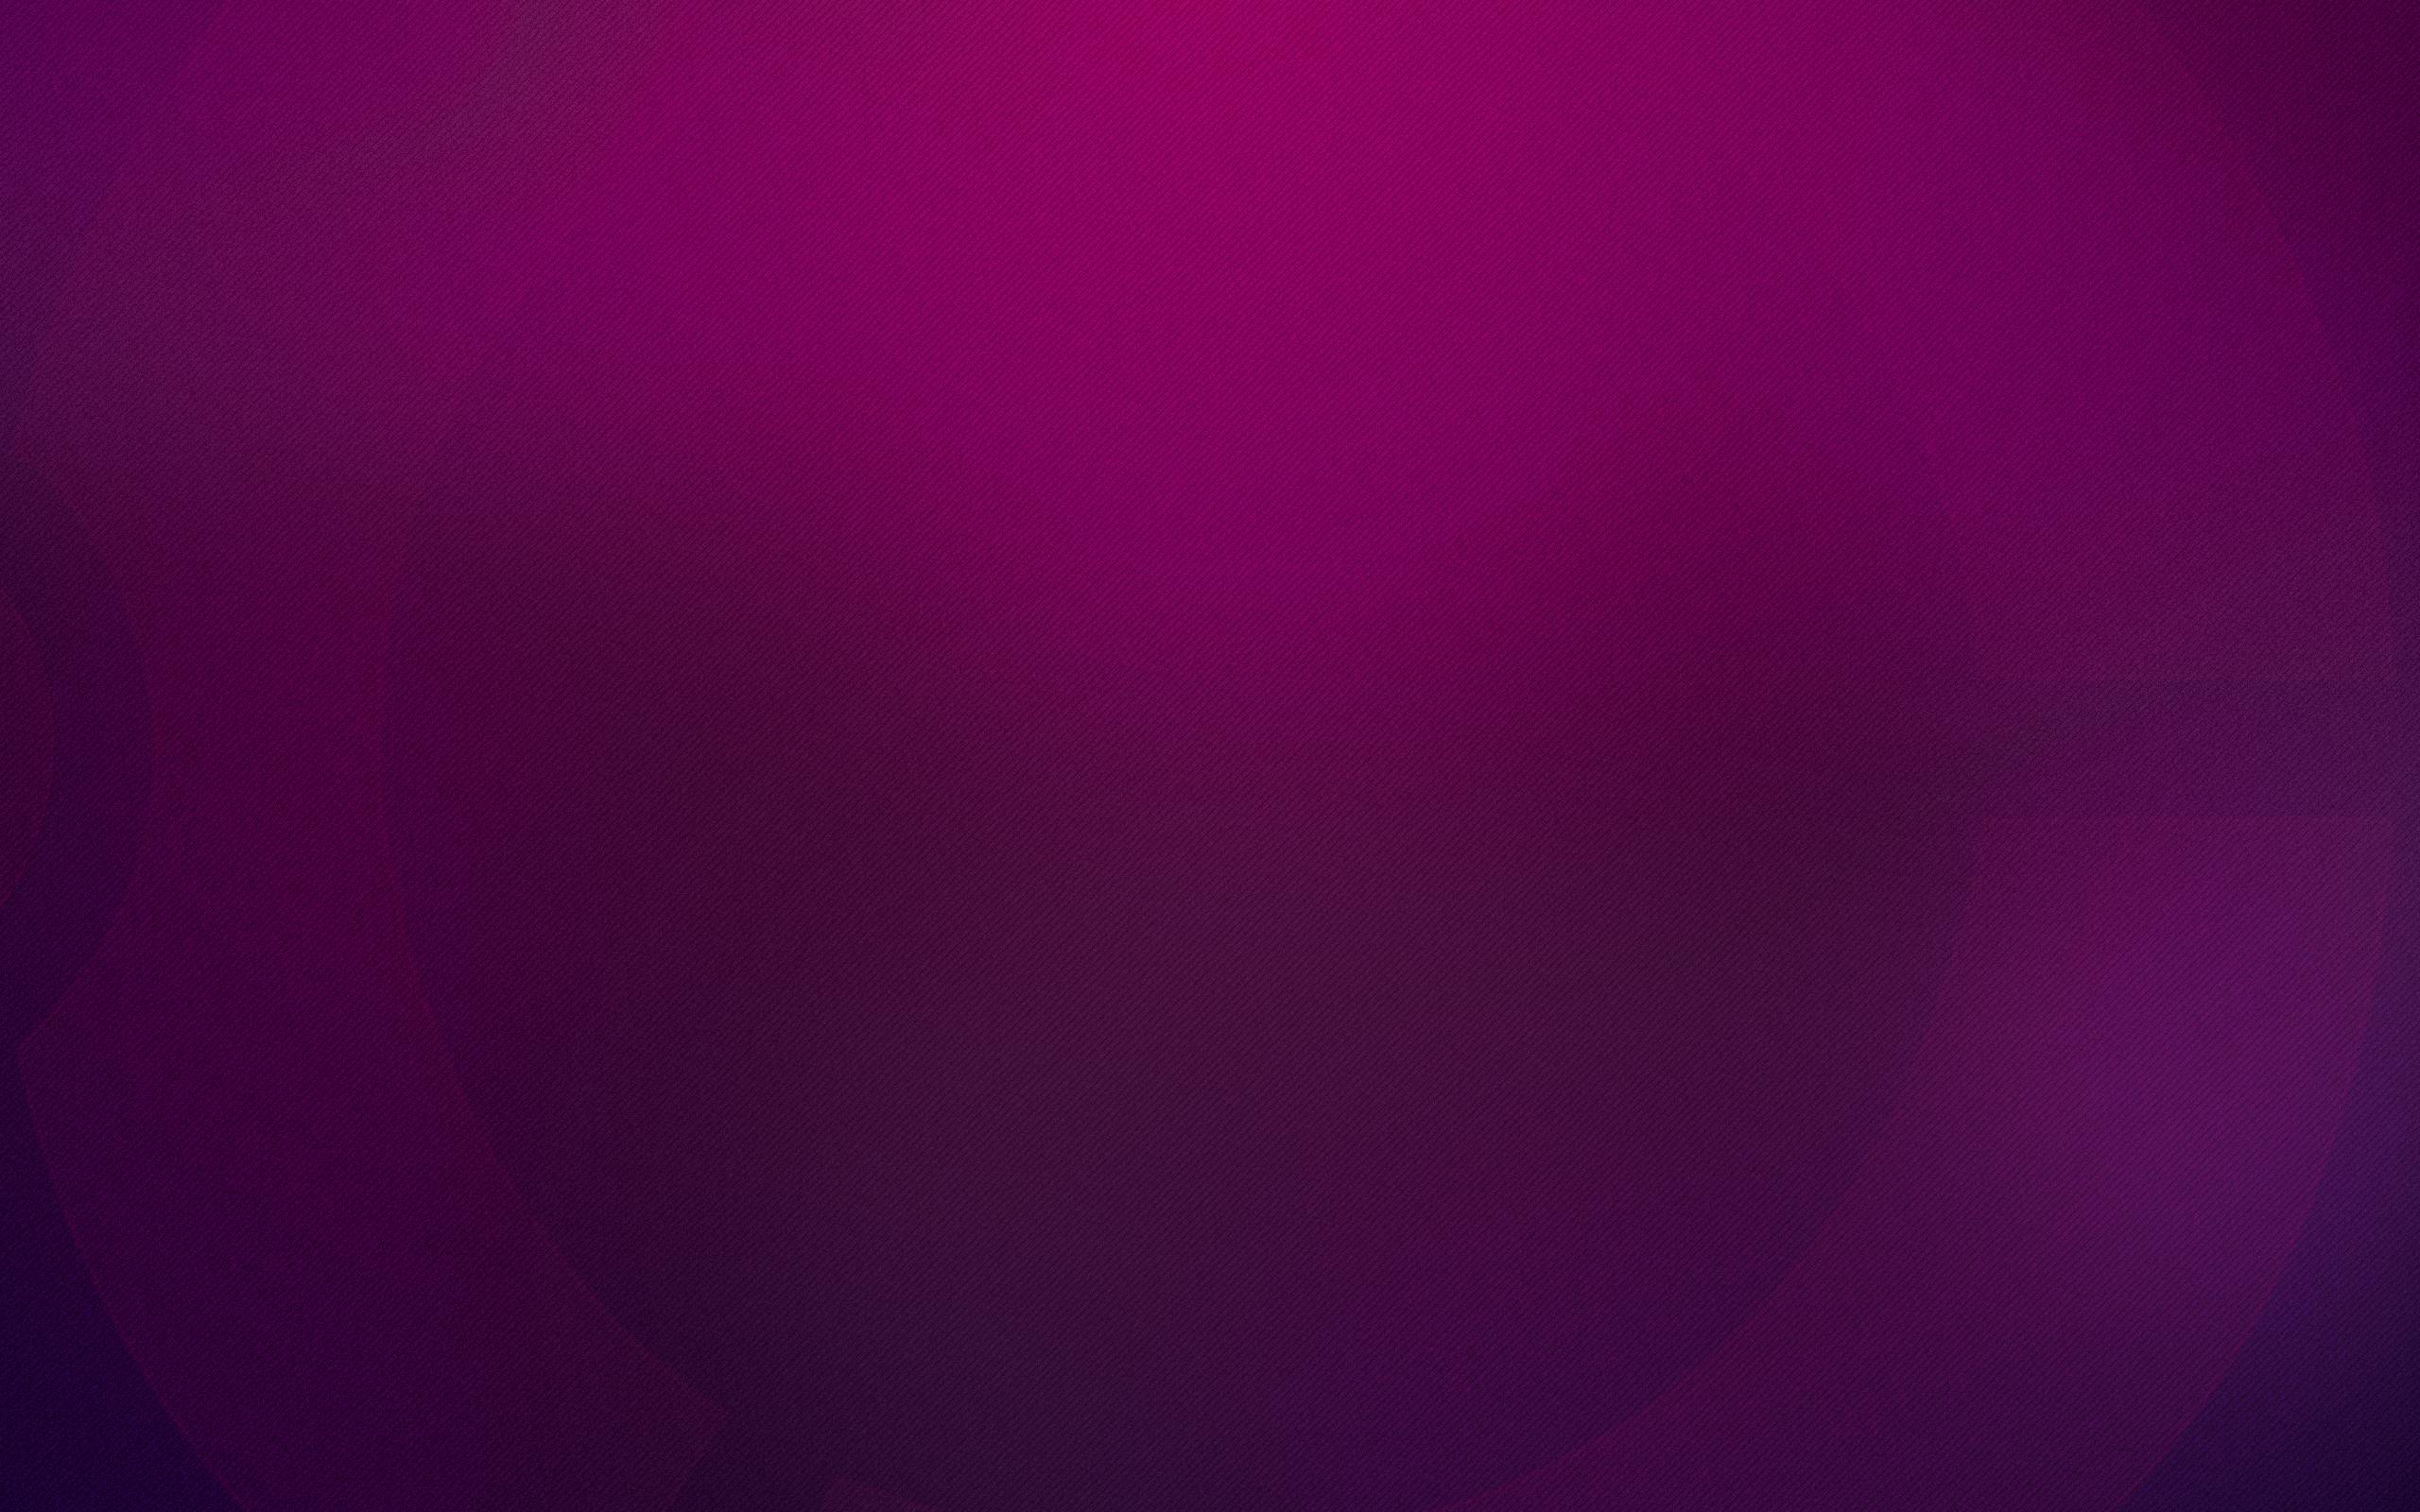 Magenta color wallpaper and image, picture, photo